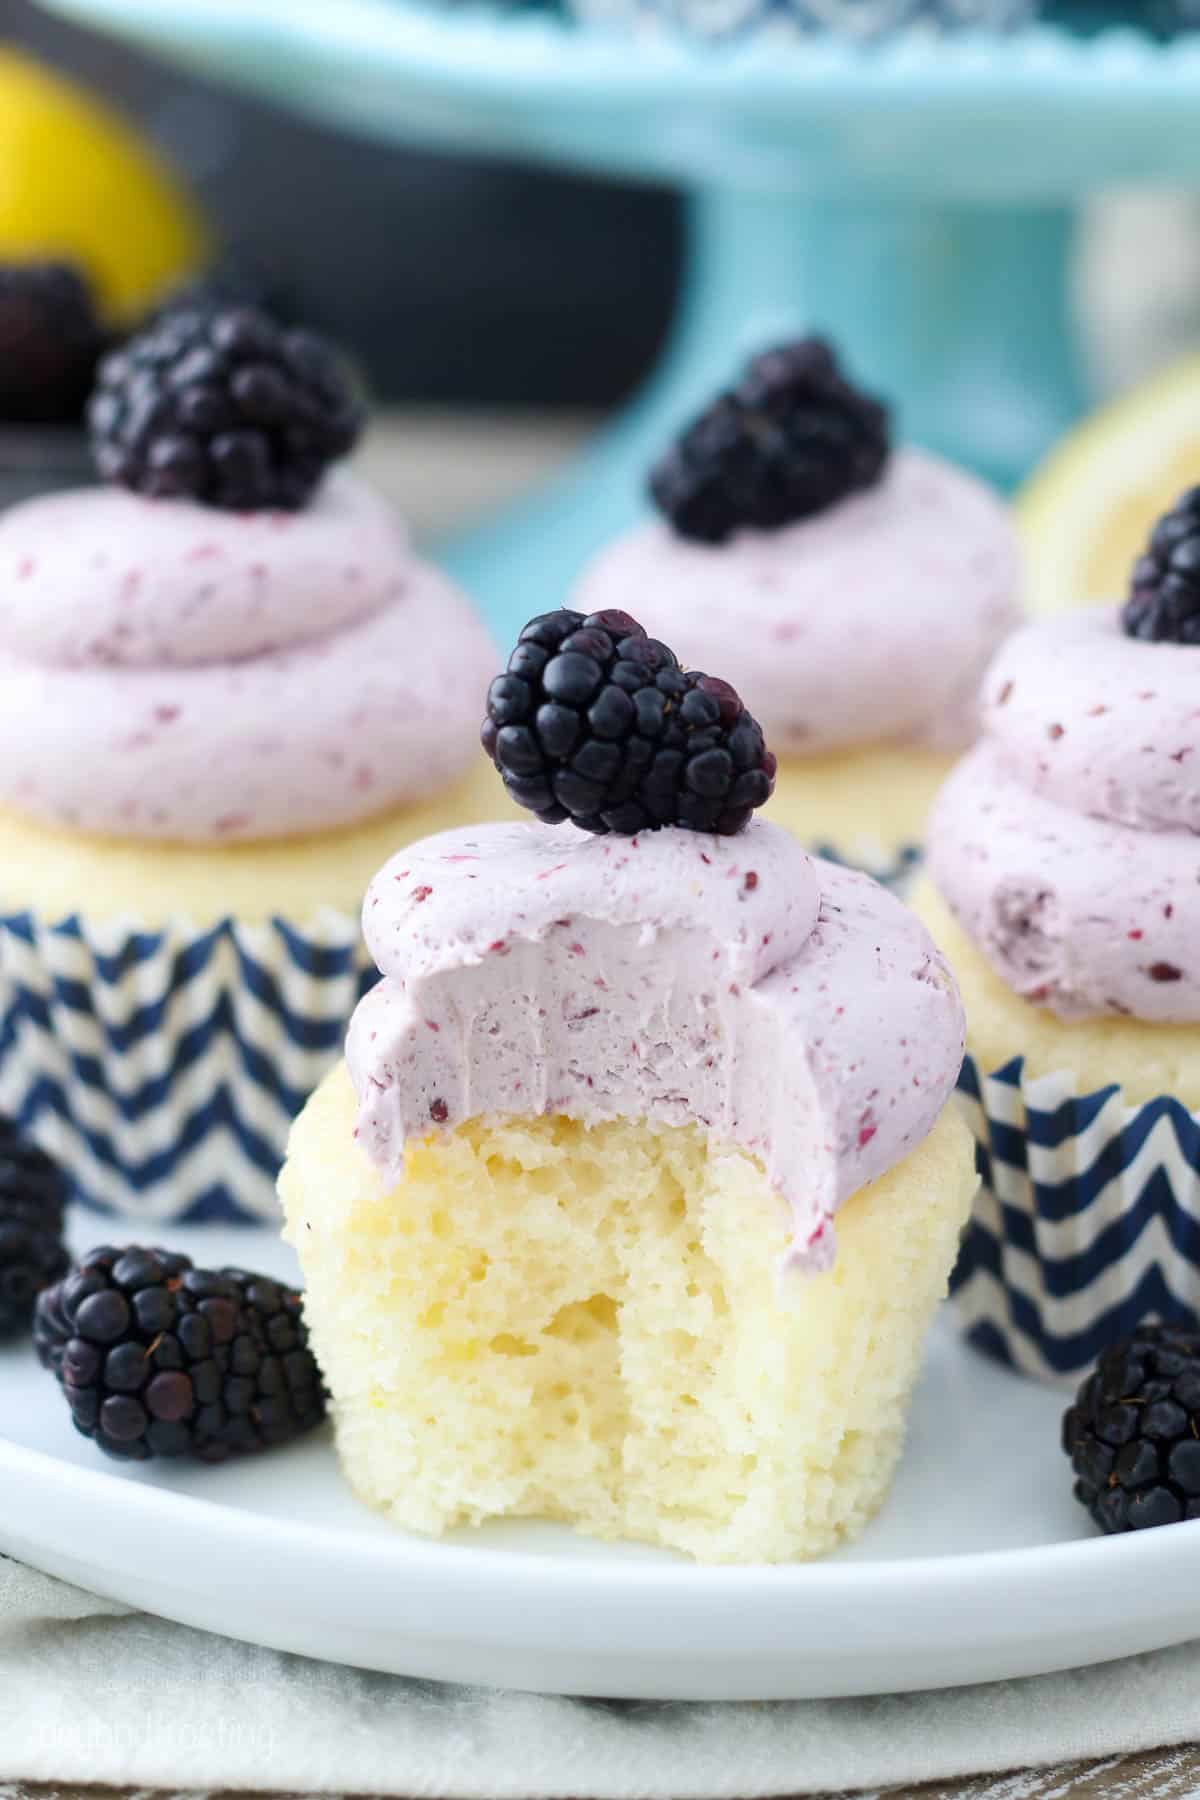 side view of a plate of lemon cupcakes topped with blackberries with a bite taken out of the front cupcake